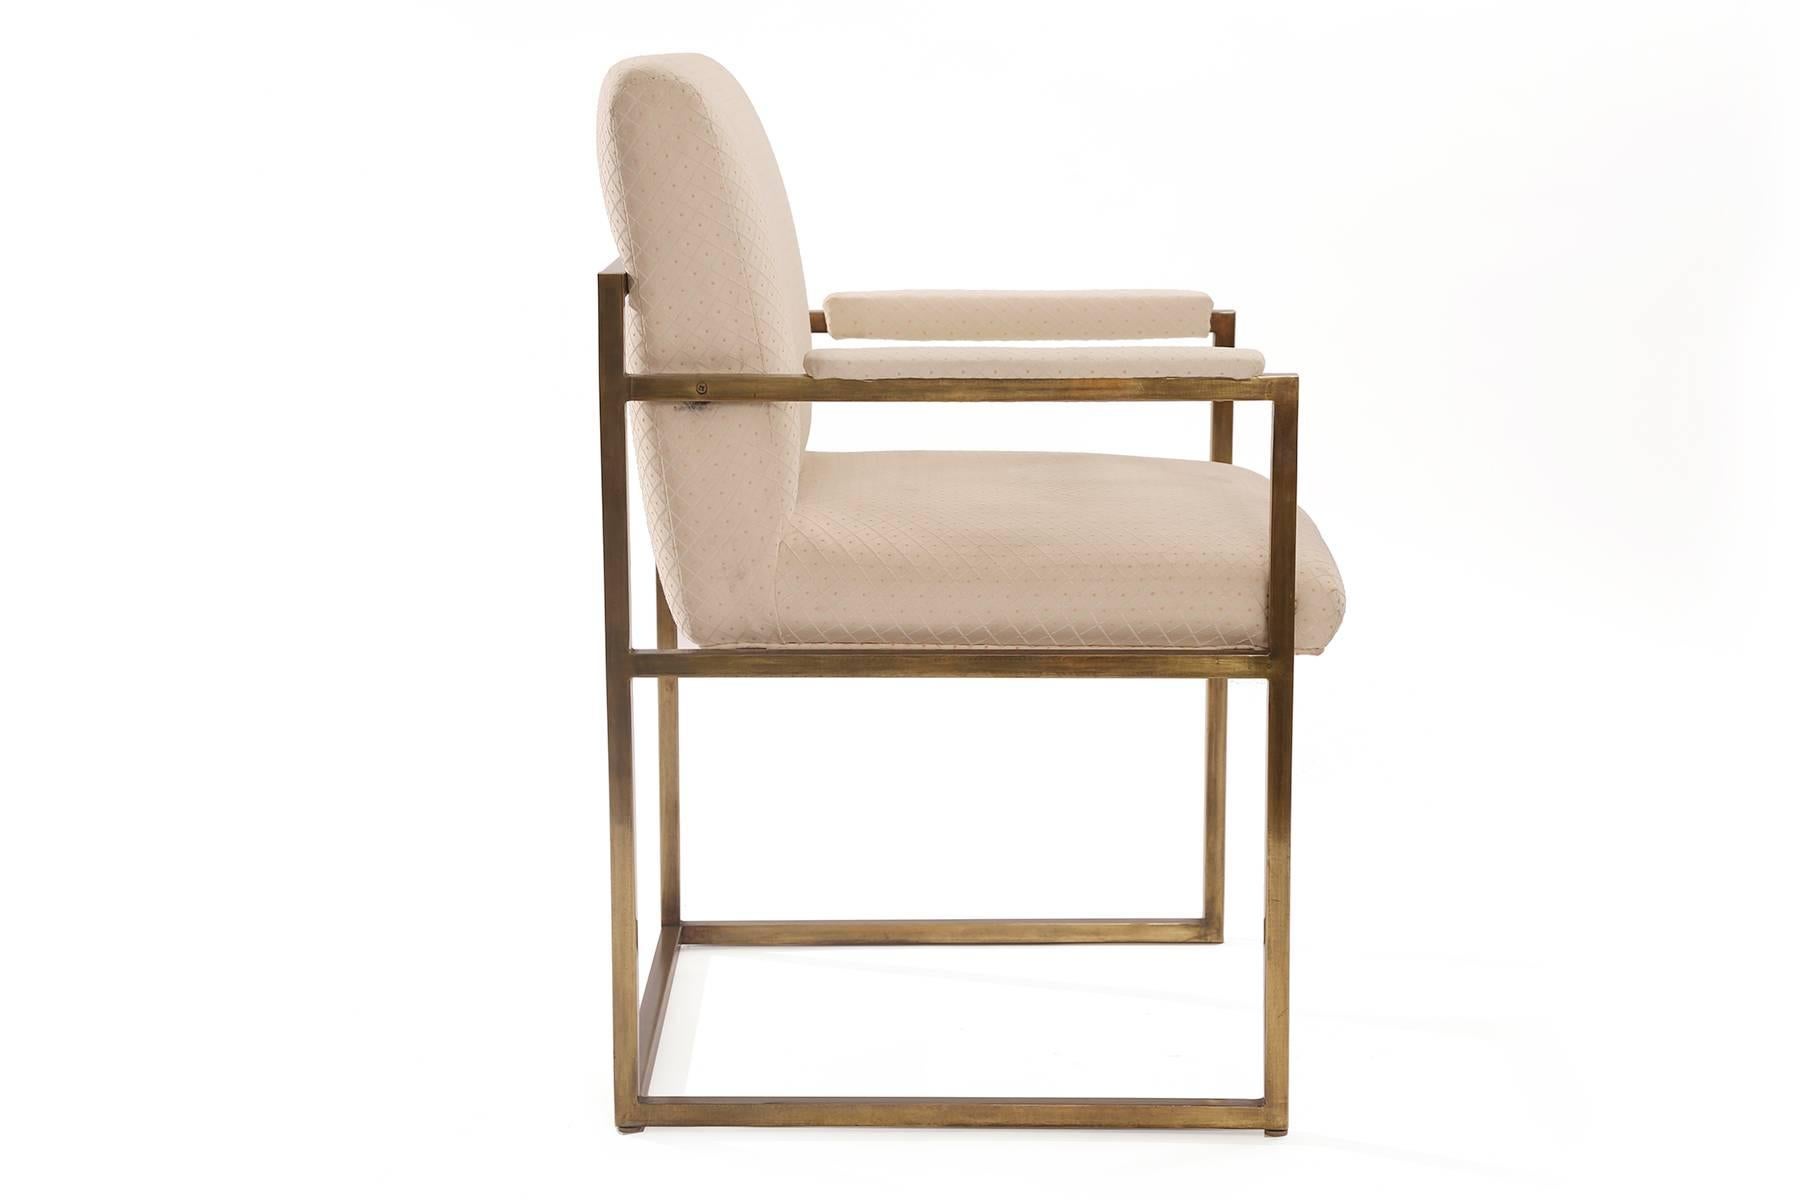 Milo Baughman for Thayer Coggin bronze and upholstered dining chairs circa early 1970s. There are two armchairs and two sides with flat bar bronze frames. These need to be reupholstered and we can happily upholster these in the leather or fabric of